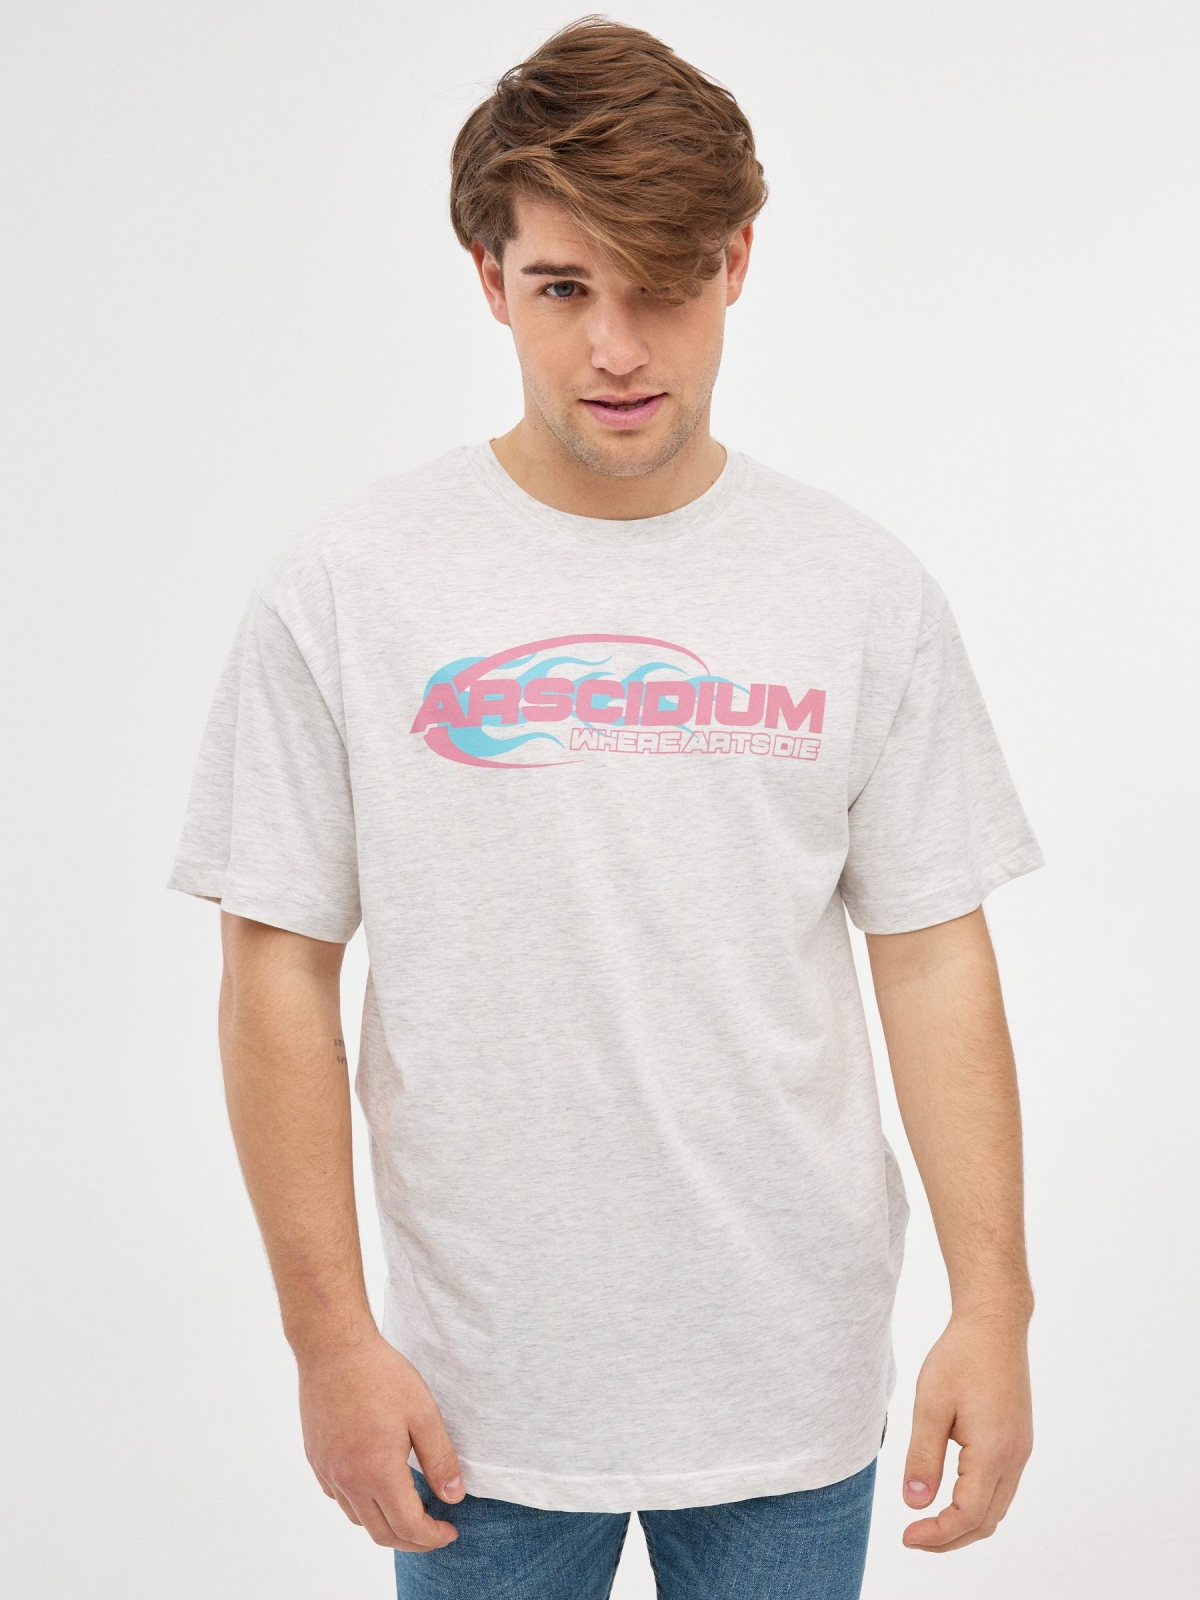 T-shirt Arscidium grey middle front view